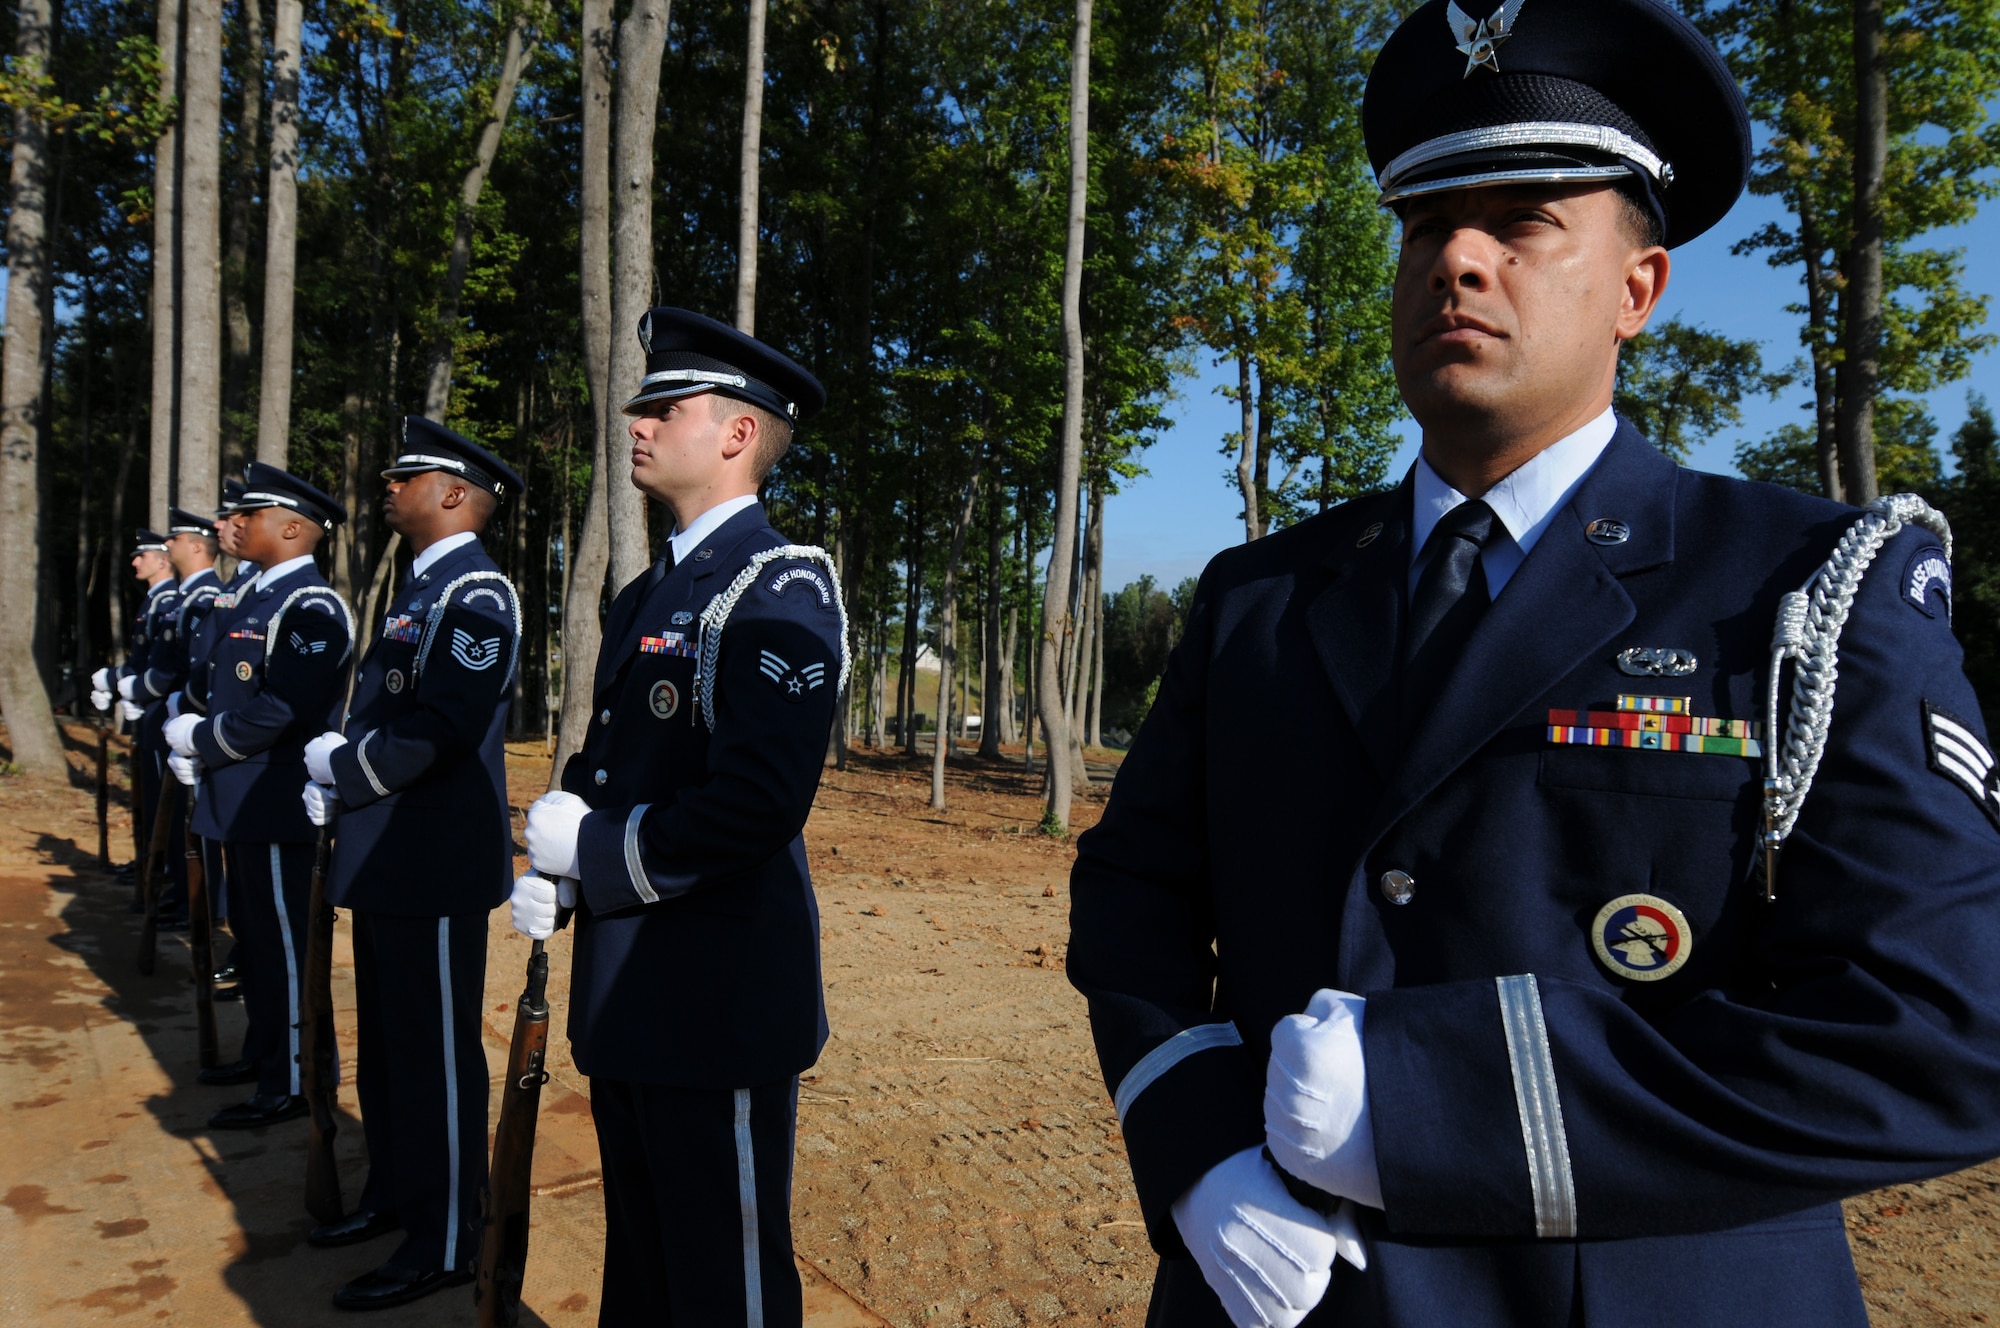 Charlotte, N.C. -- Airmen of the 145th Airlift Wing Honor Guard stand-by at the memorial service honoring North Carolina Air National Guardsmen deceased within the last year. (NCANG photo by Tech. Sgt. Brian E. Christiansen)